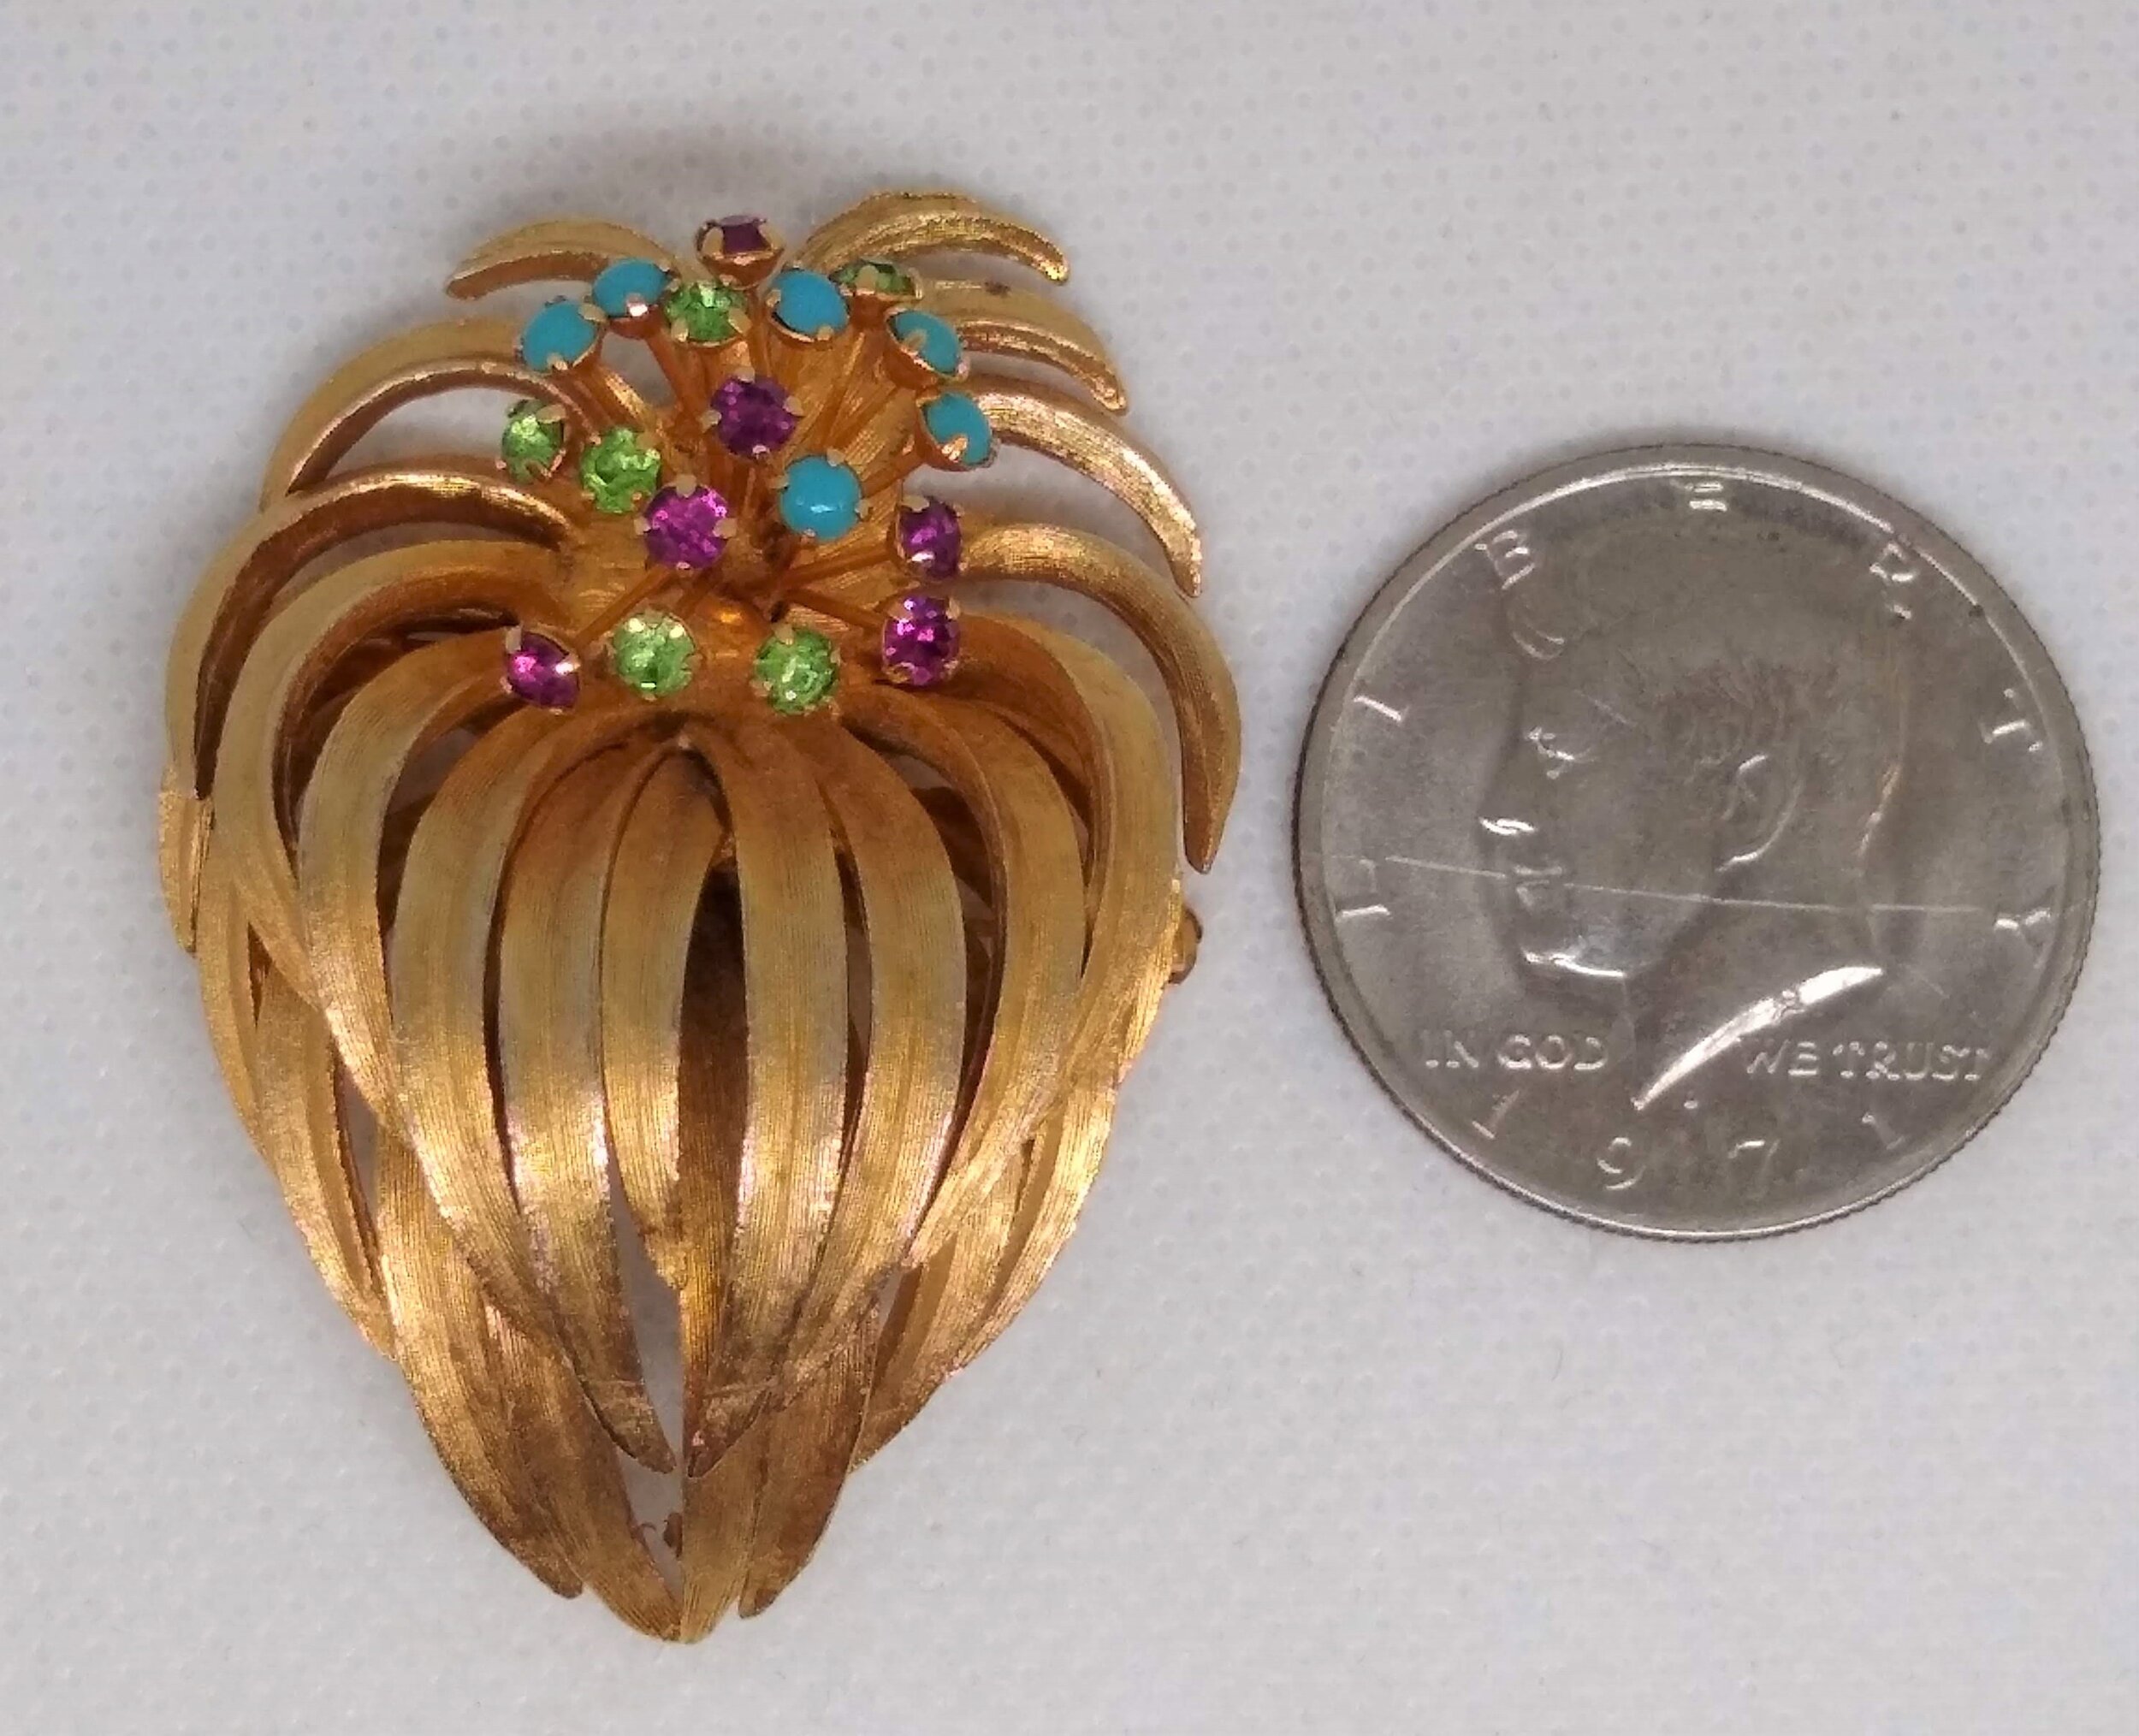 Vintage Costume,Signed Pastelli, Brooch/Pin with colorful Rhinestones. —